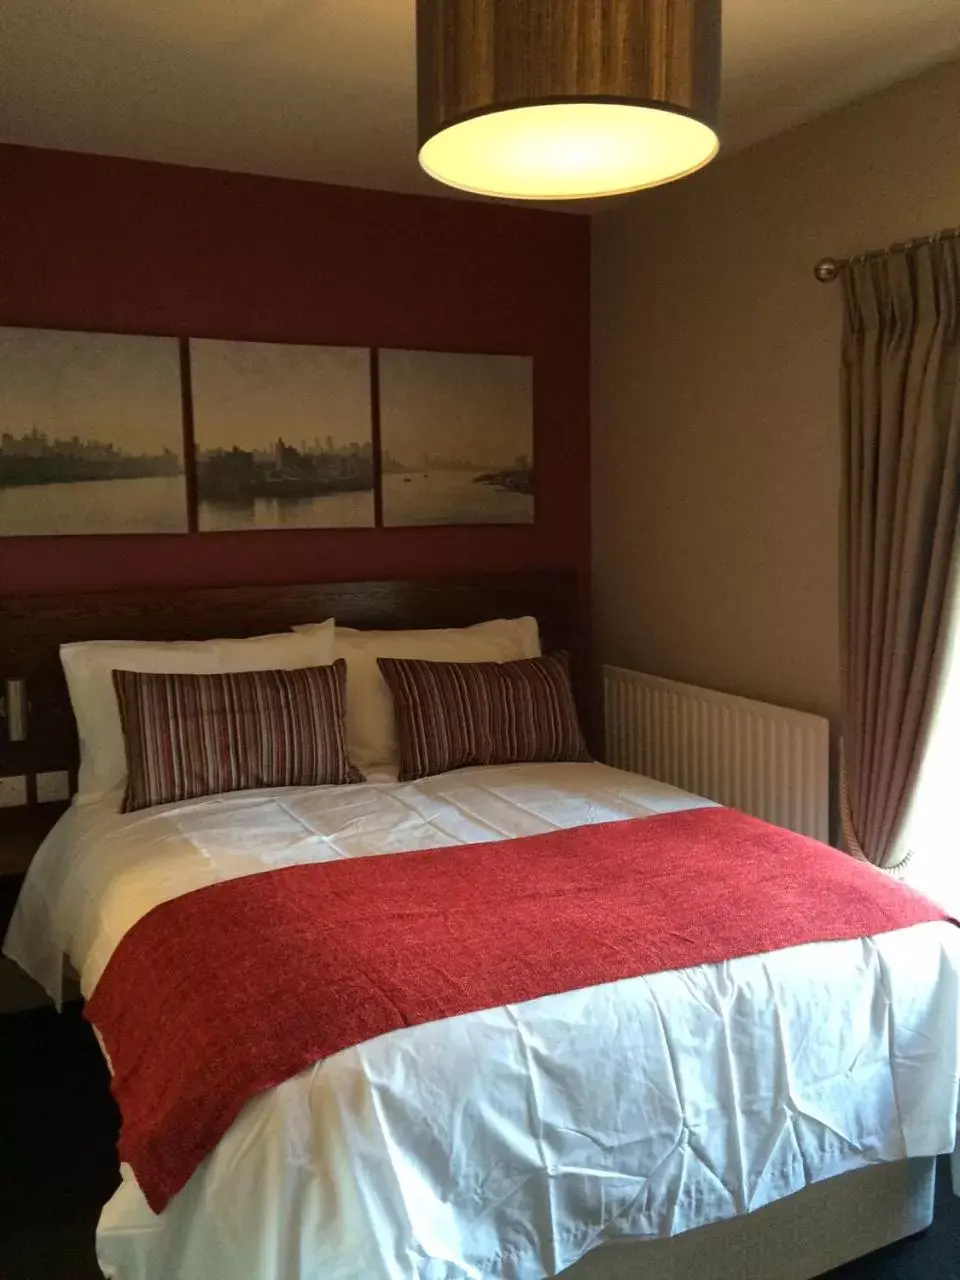 Bed, Room Photo in Woolpack Pub & Kitchen